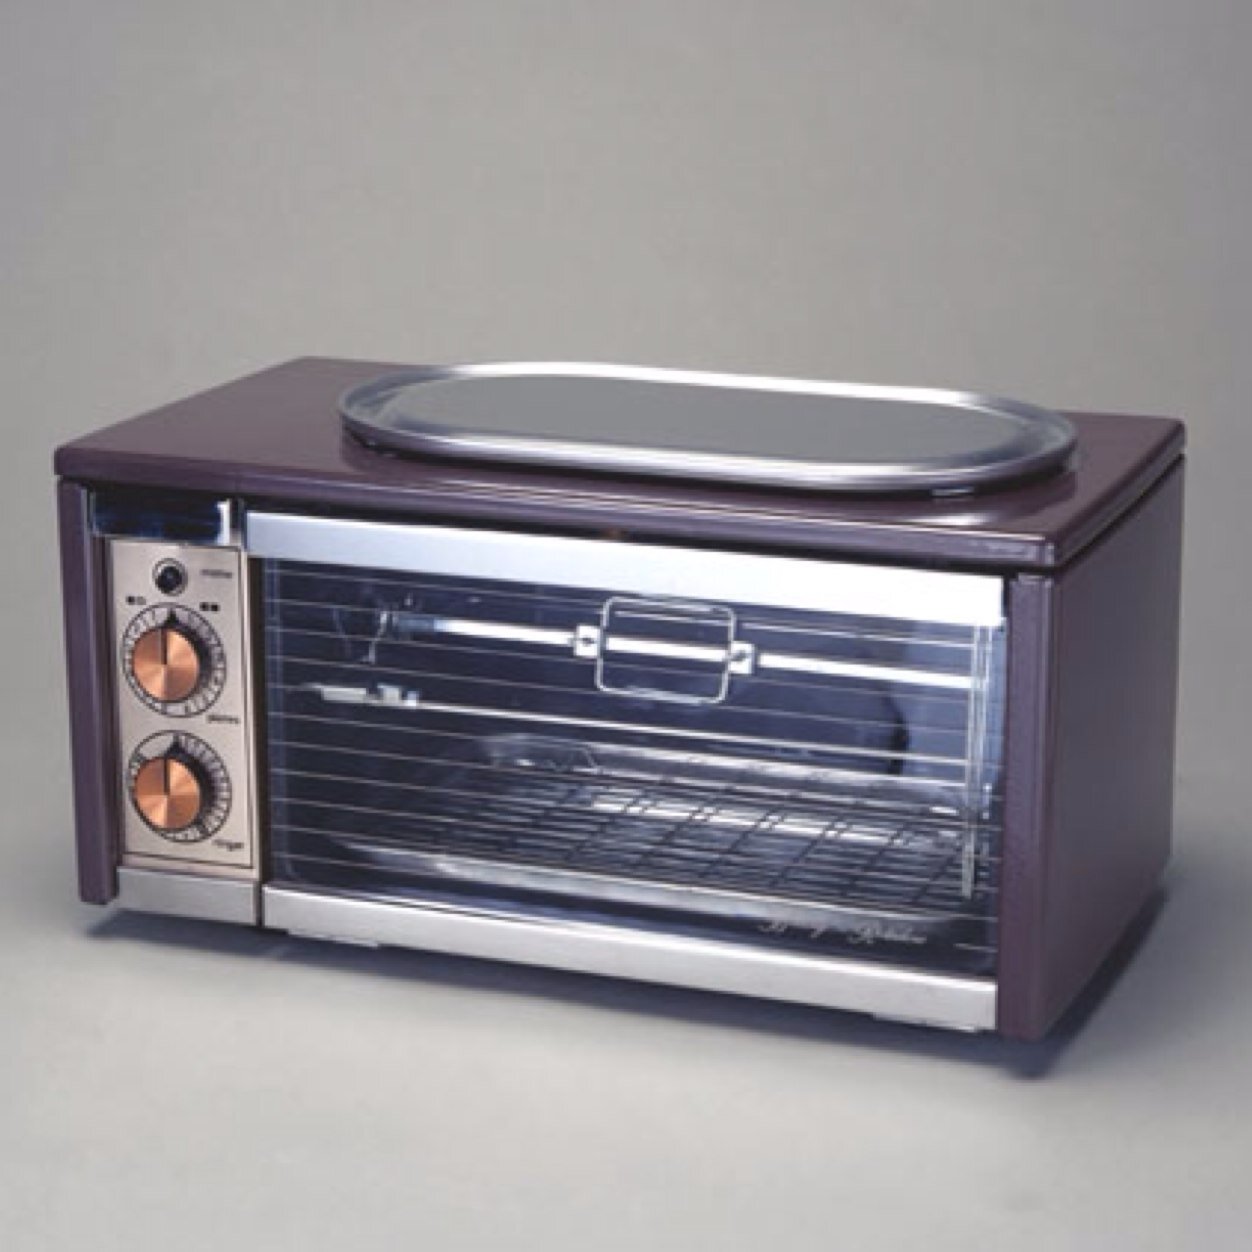 Best invention of the 20th century #microwave